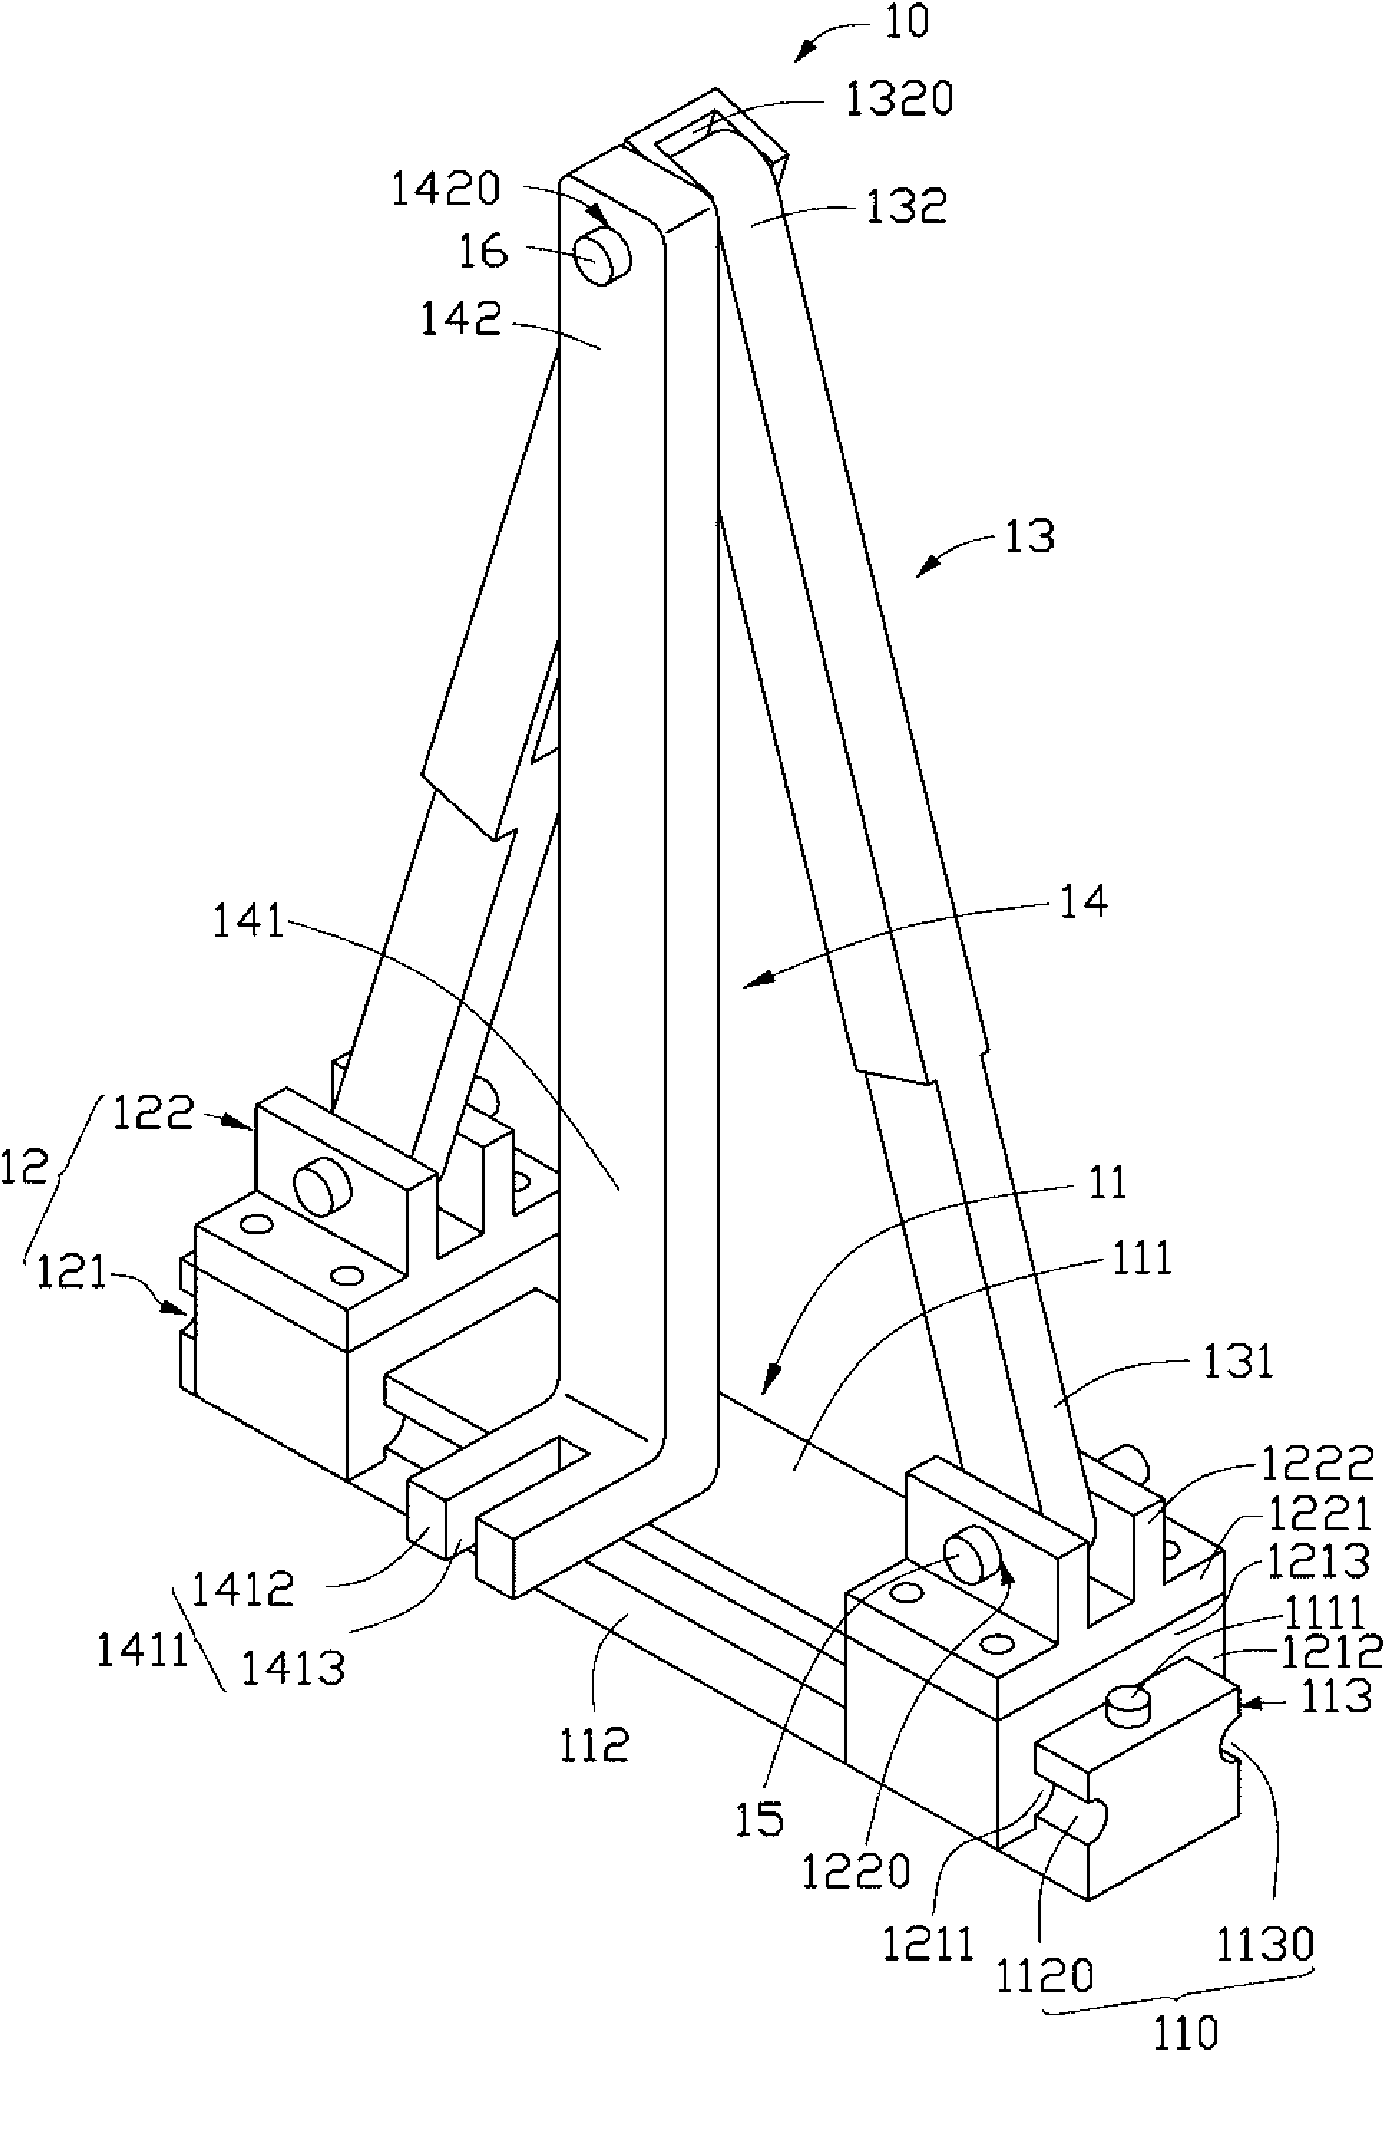 Core insert drawing device